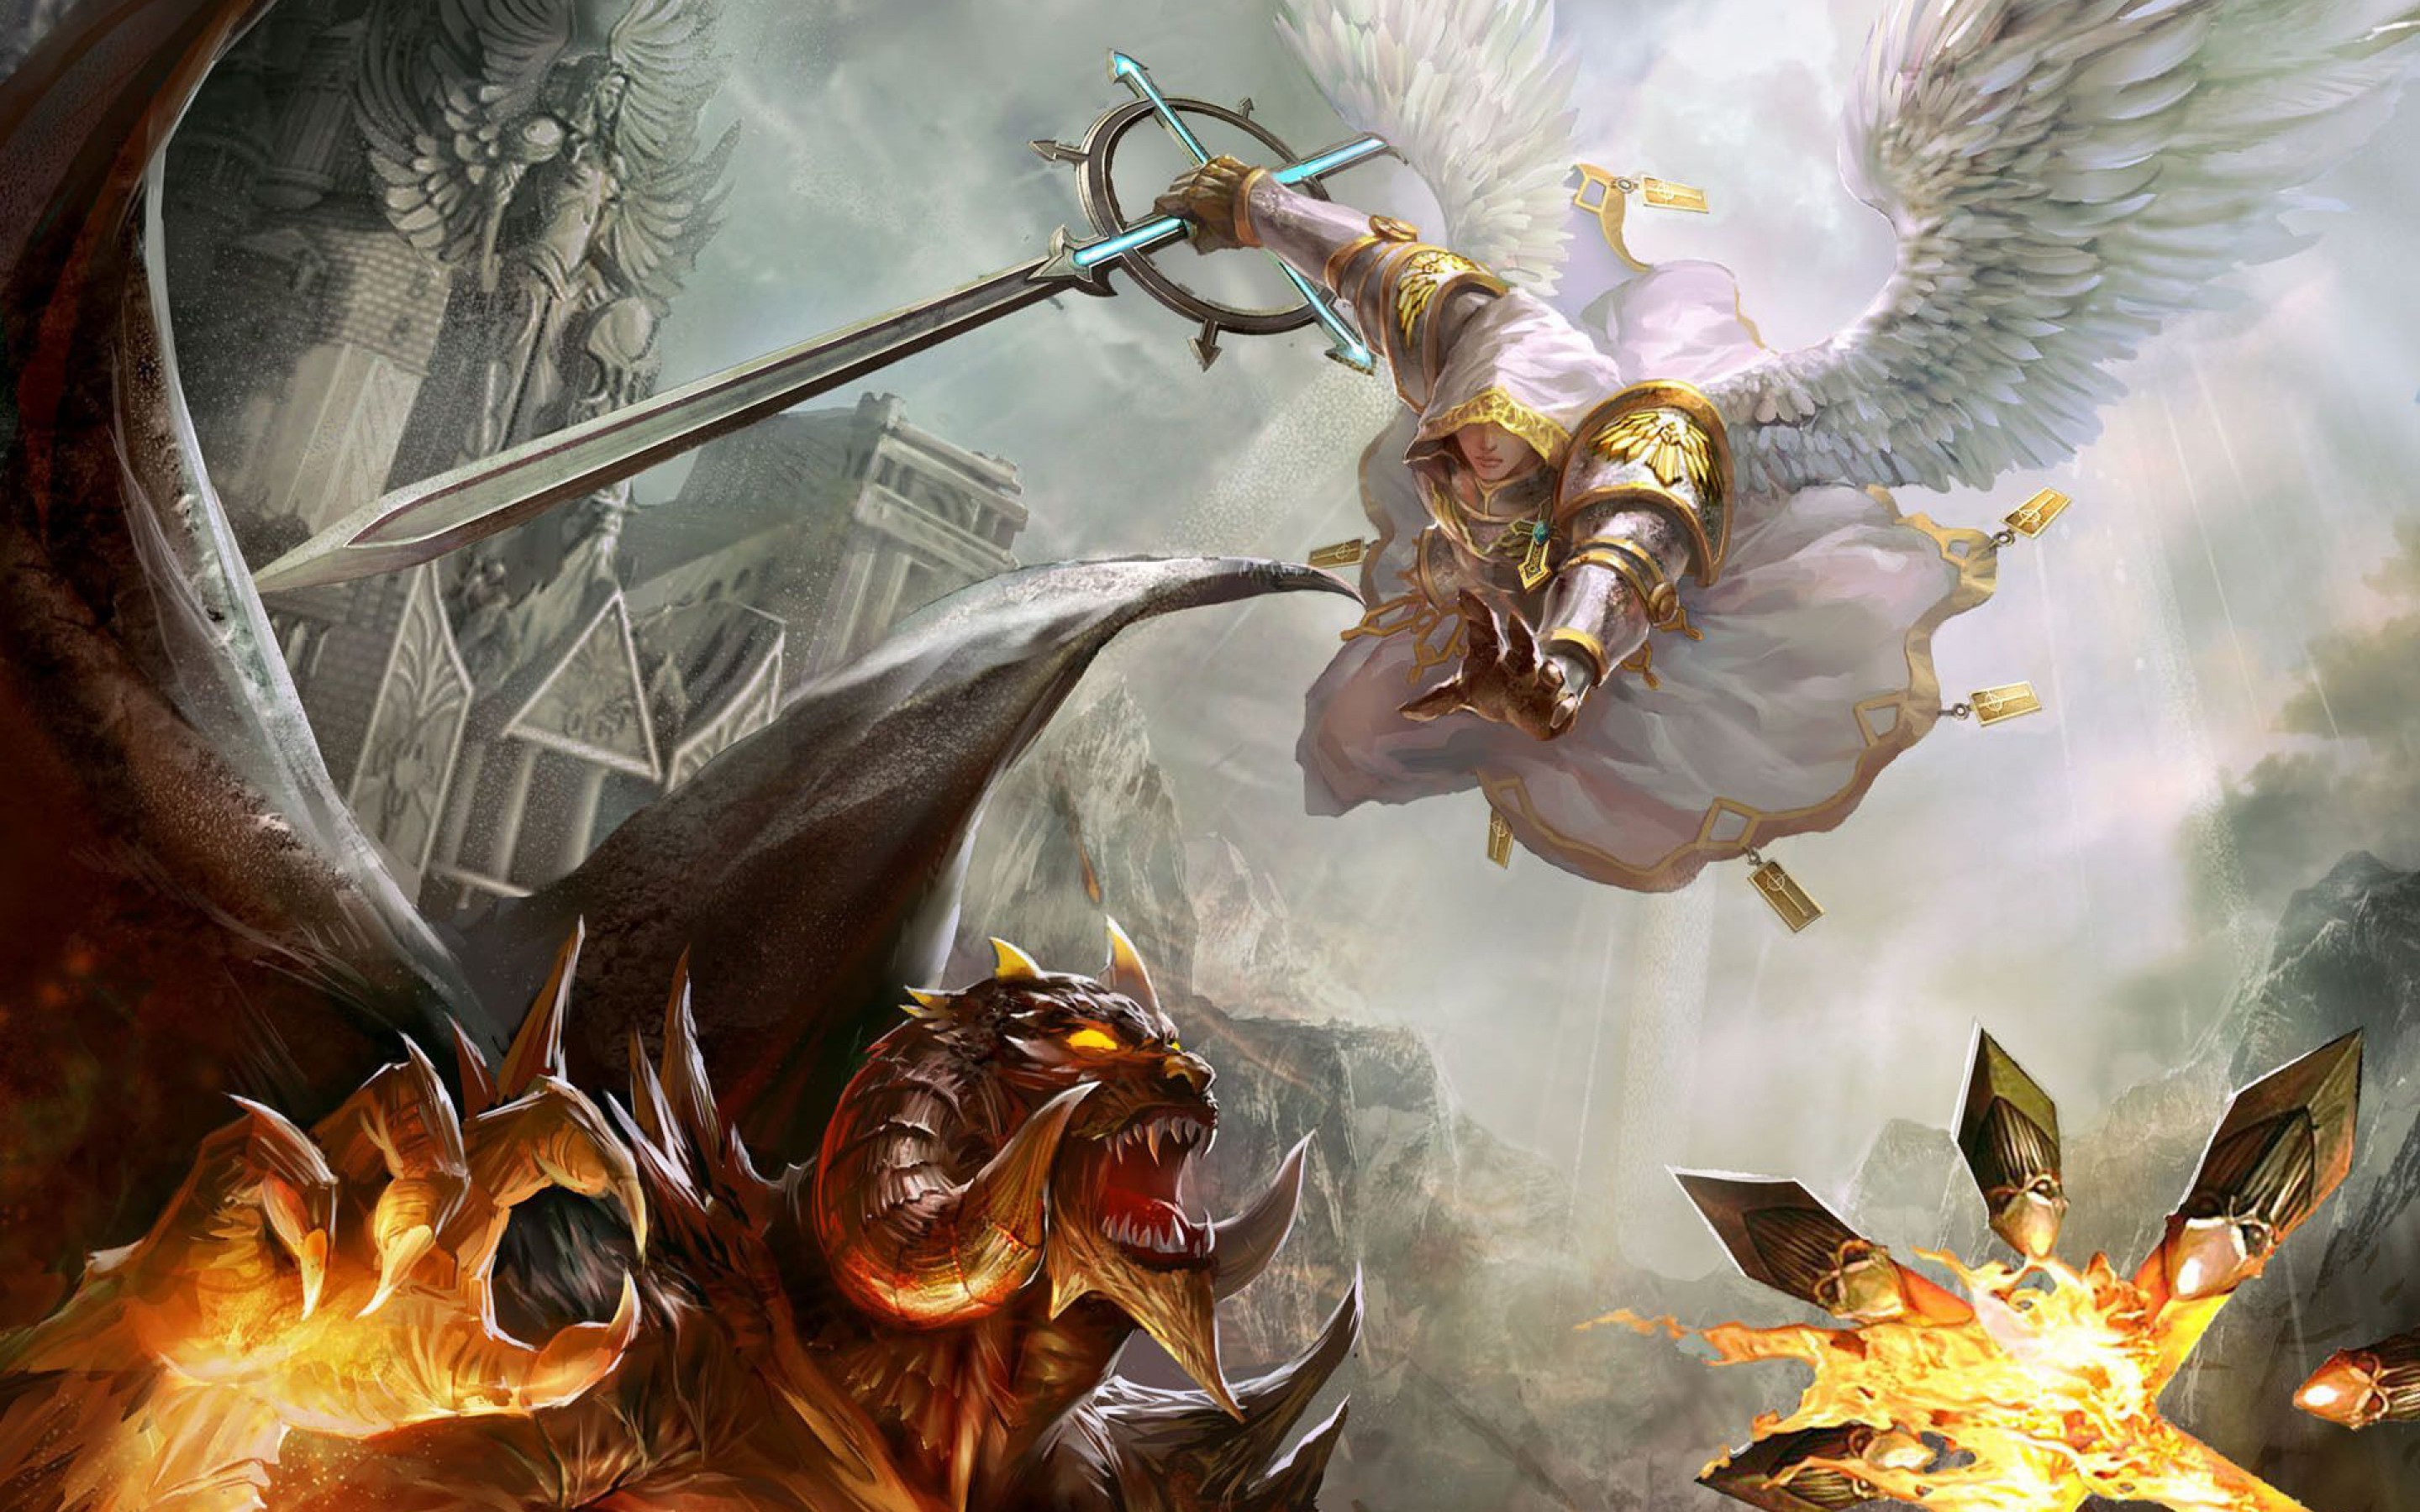 General 2880x1800 Heroes of Might And Magic 5 fantasy art demon wings sword video games women with swords fantasy girl glowing eyes PC gaming video game art video game girls